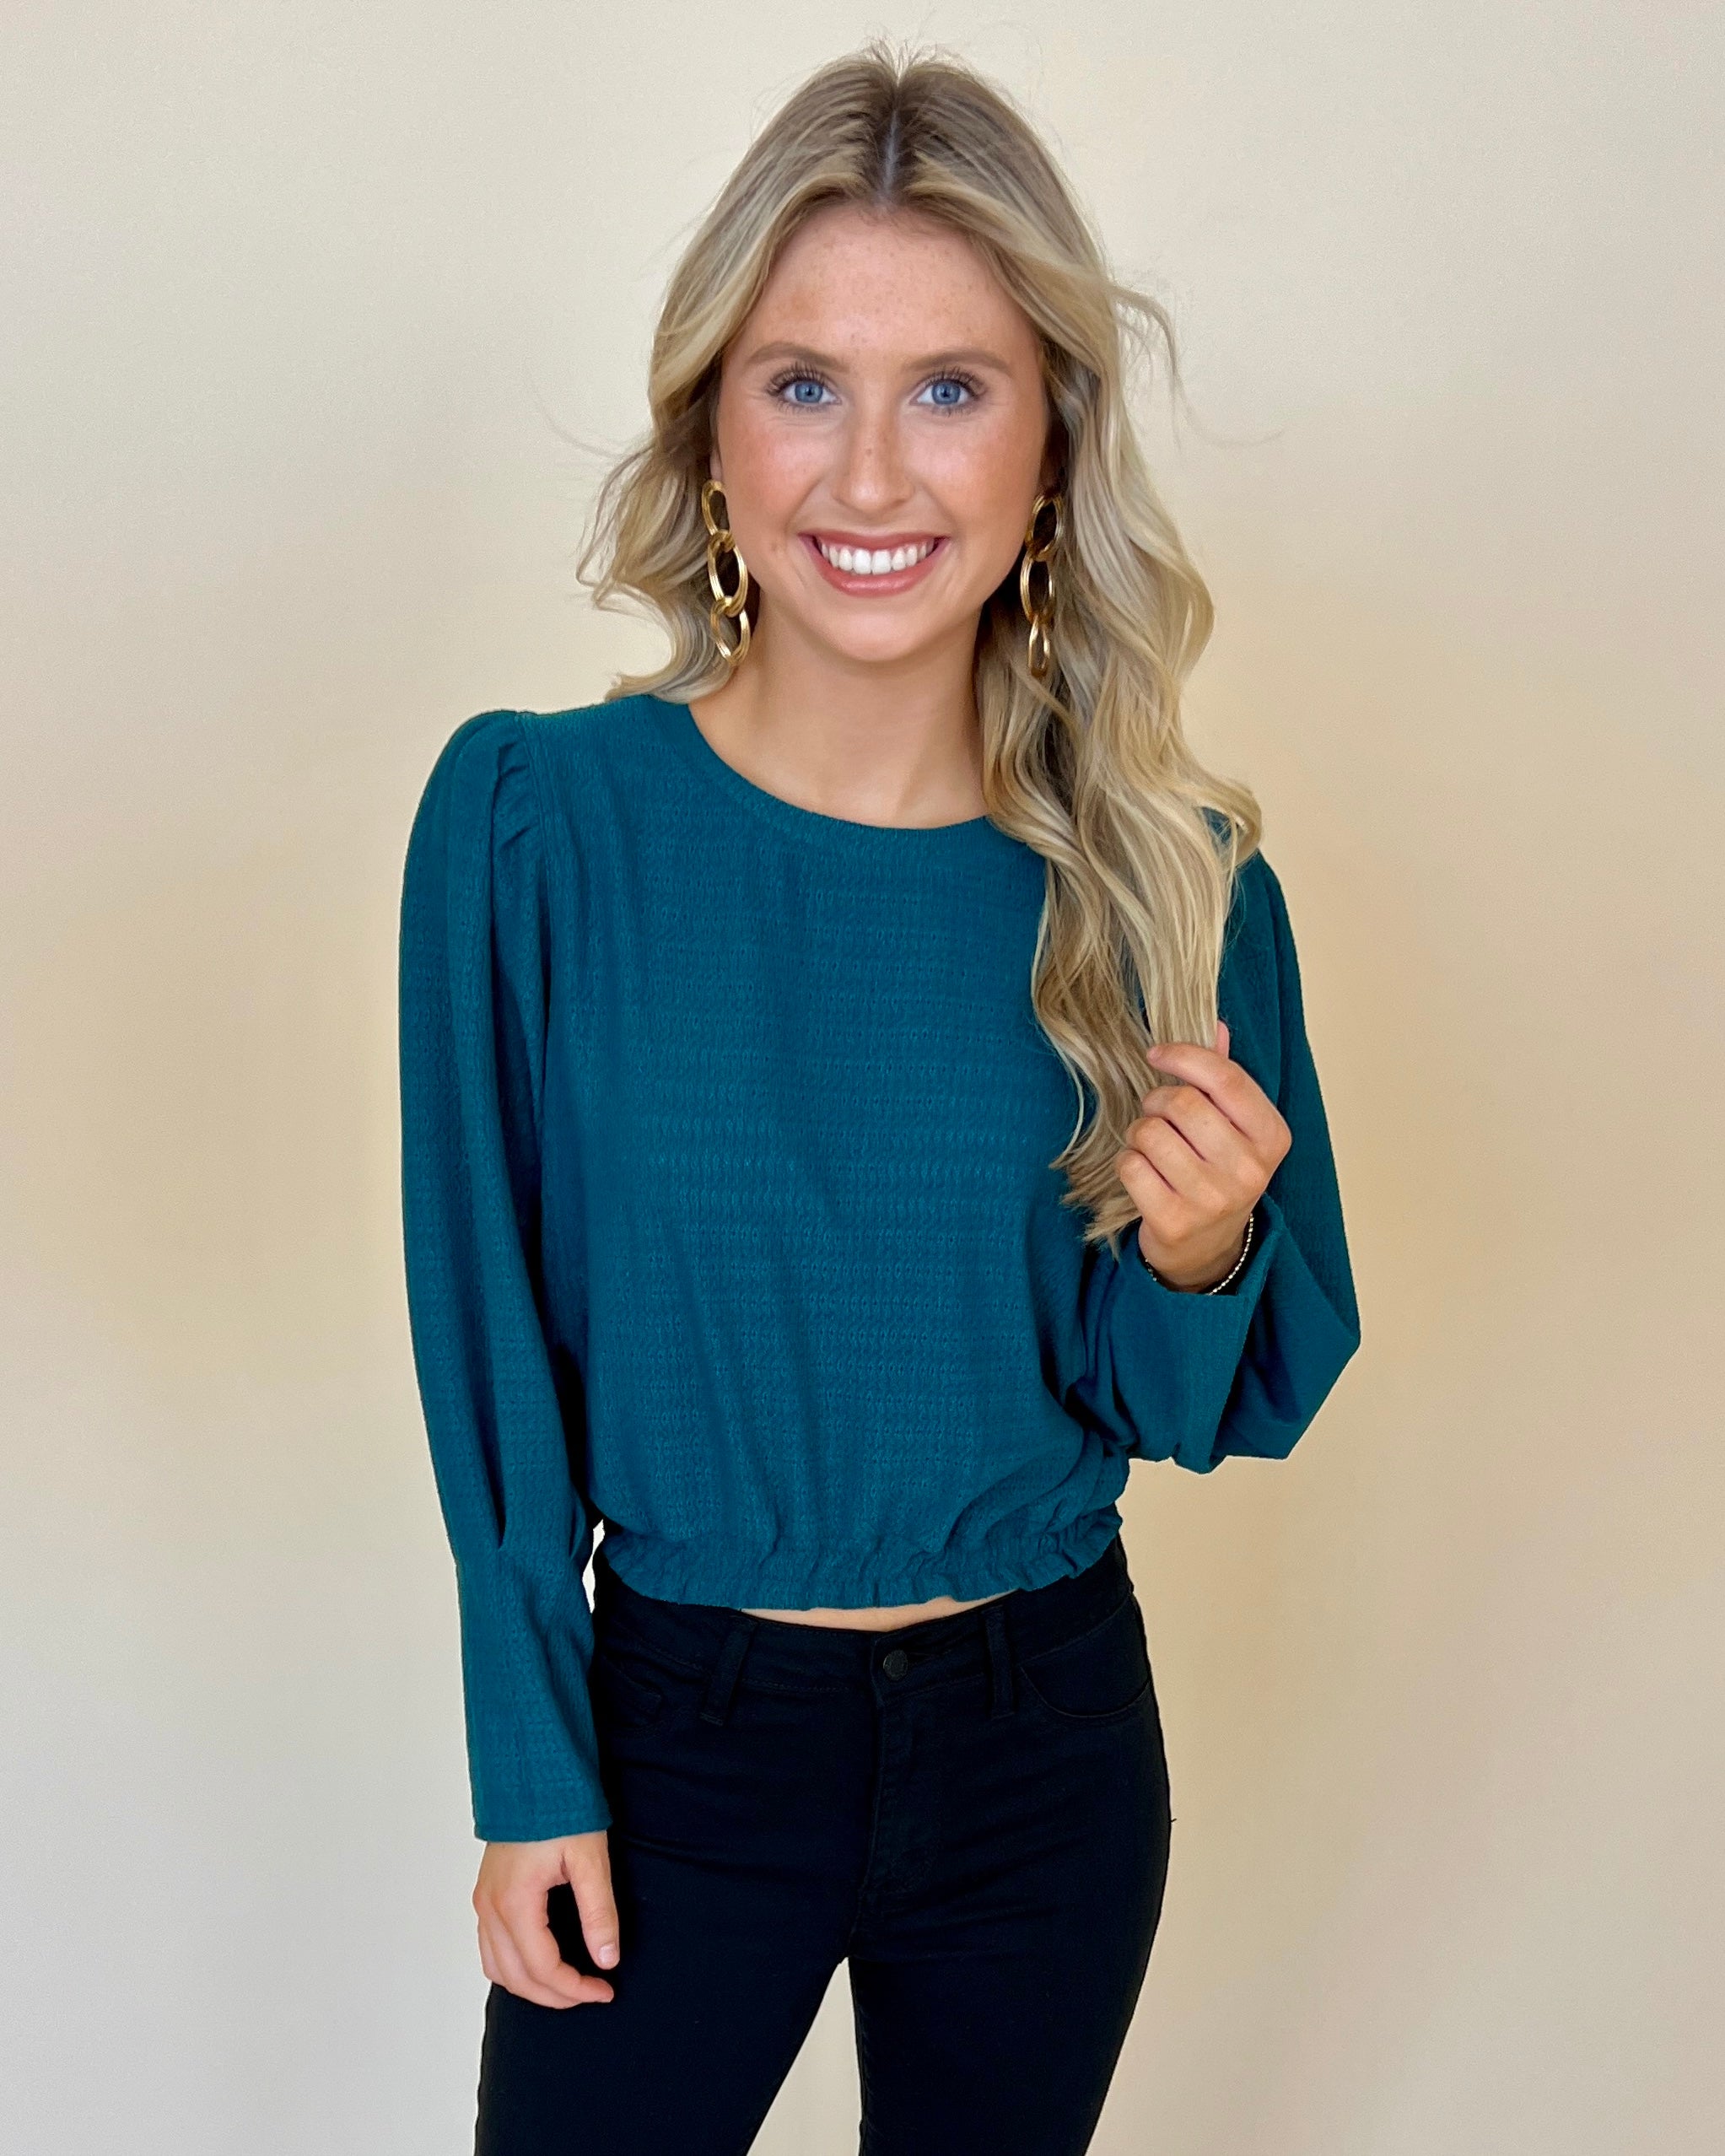 Crushing On You Teal Textured Cutout Crop Top-Shop-Womens-Boutique-Clothing